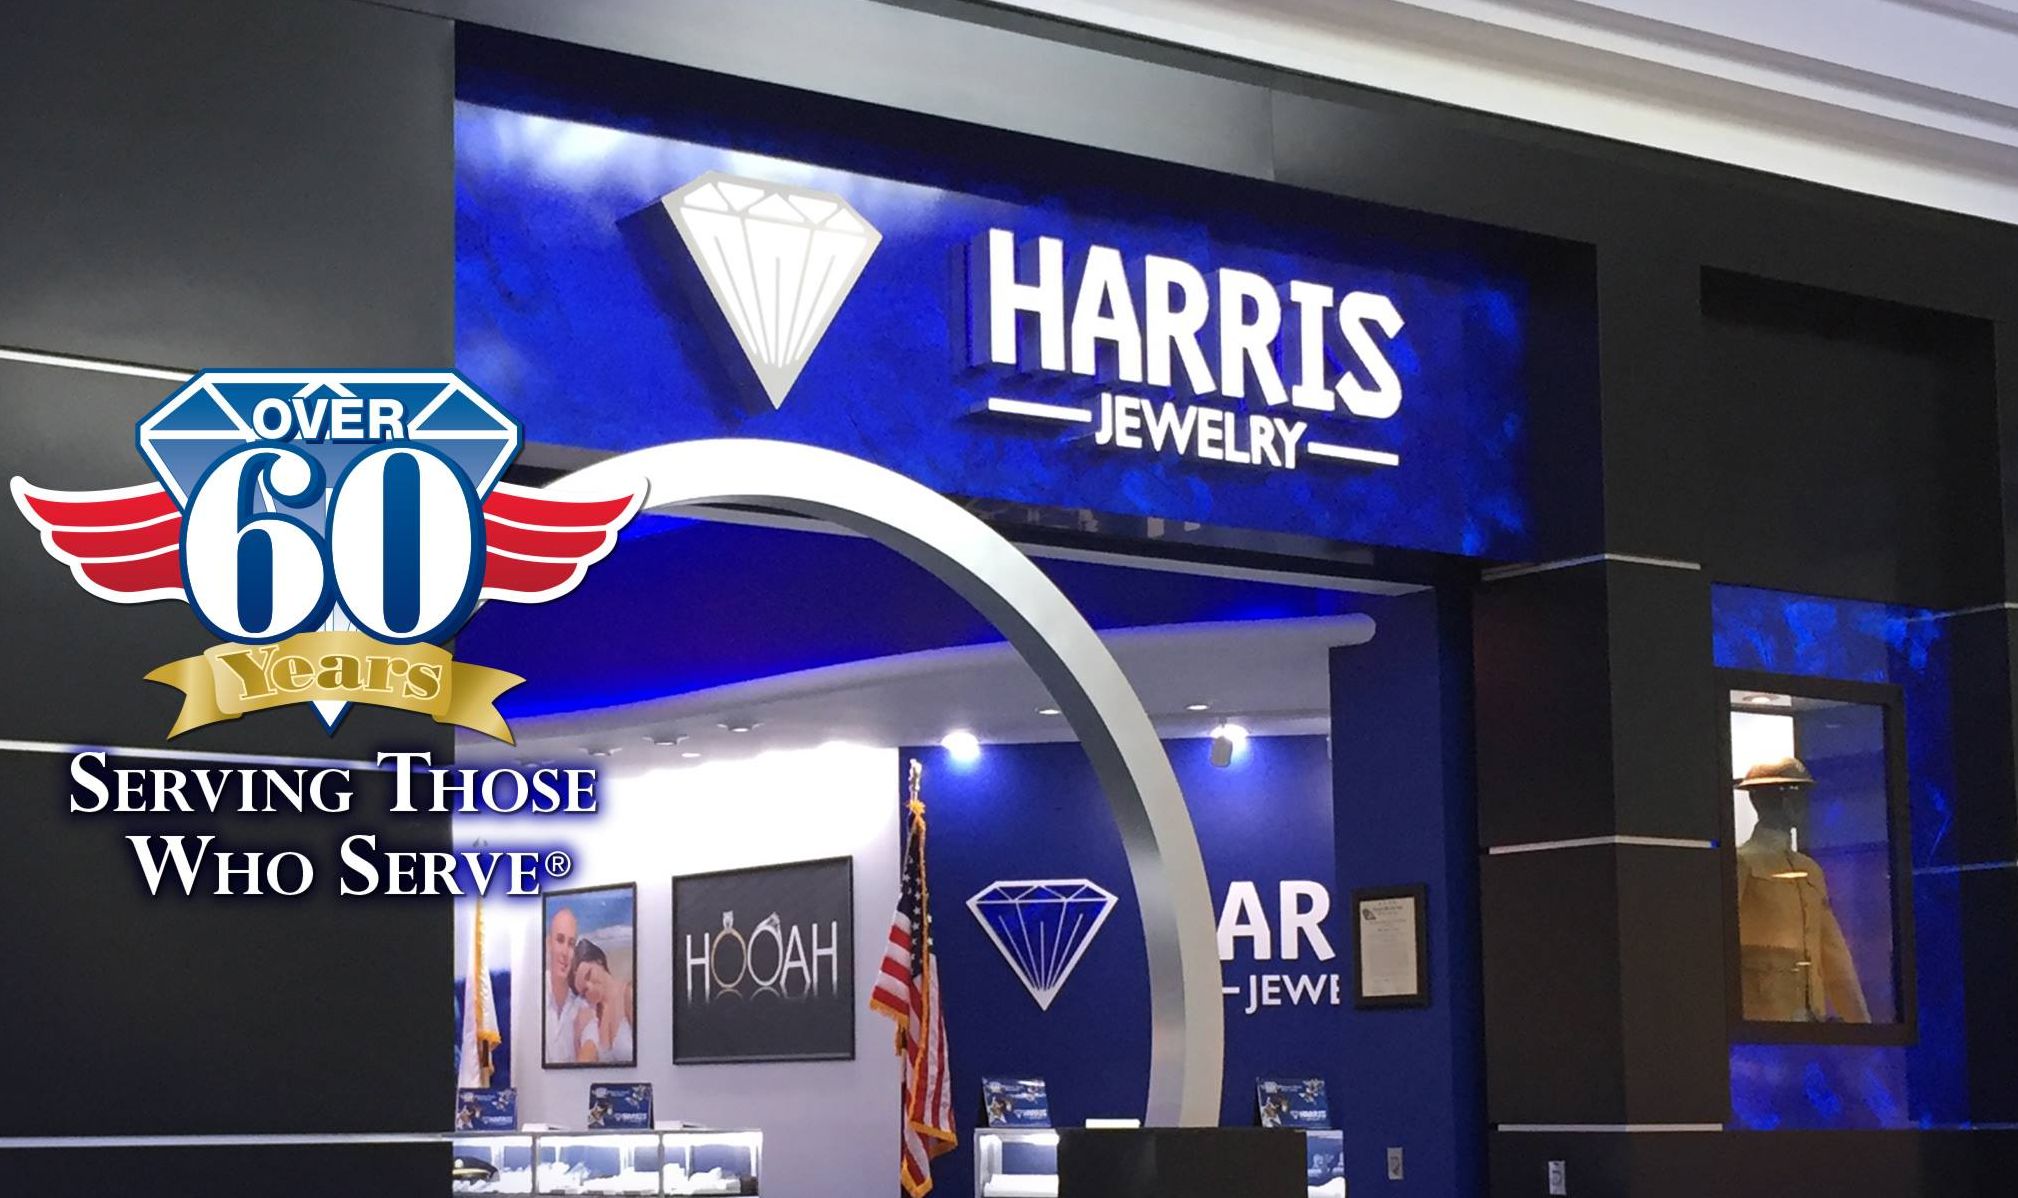 State Sues Harris Jewelry For Illegal Business Practices2018 x 1198